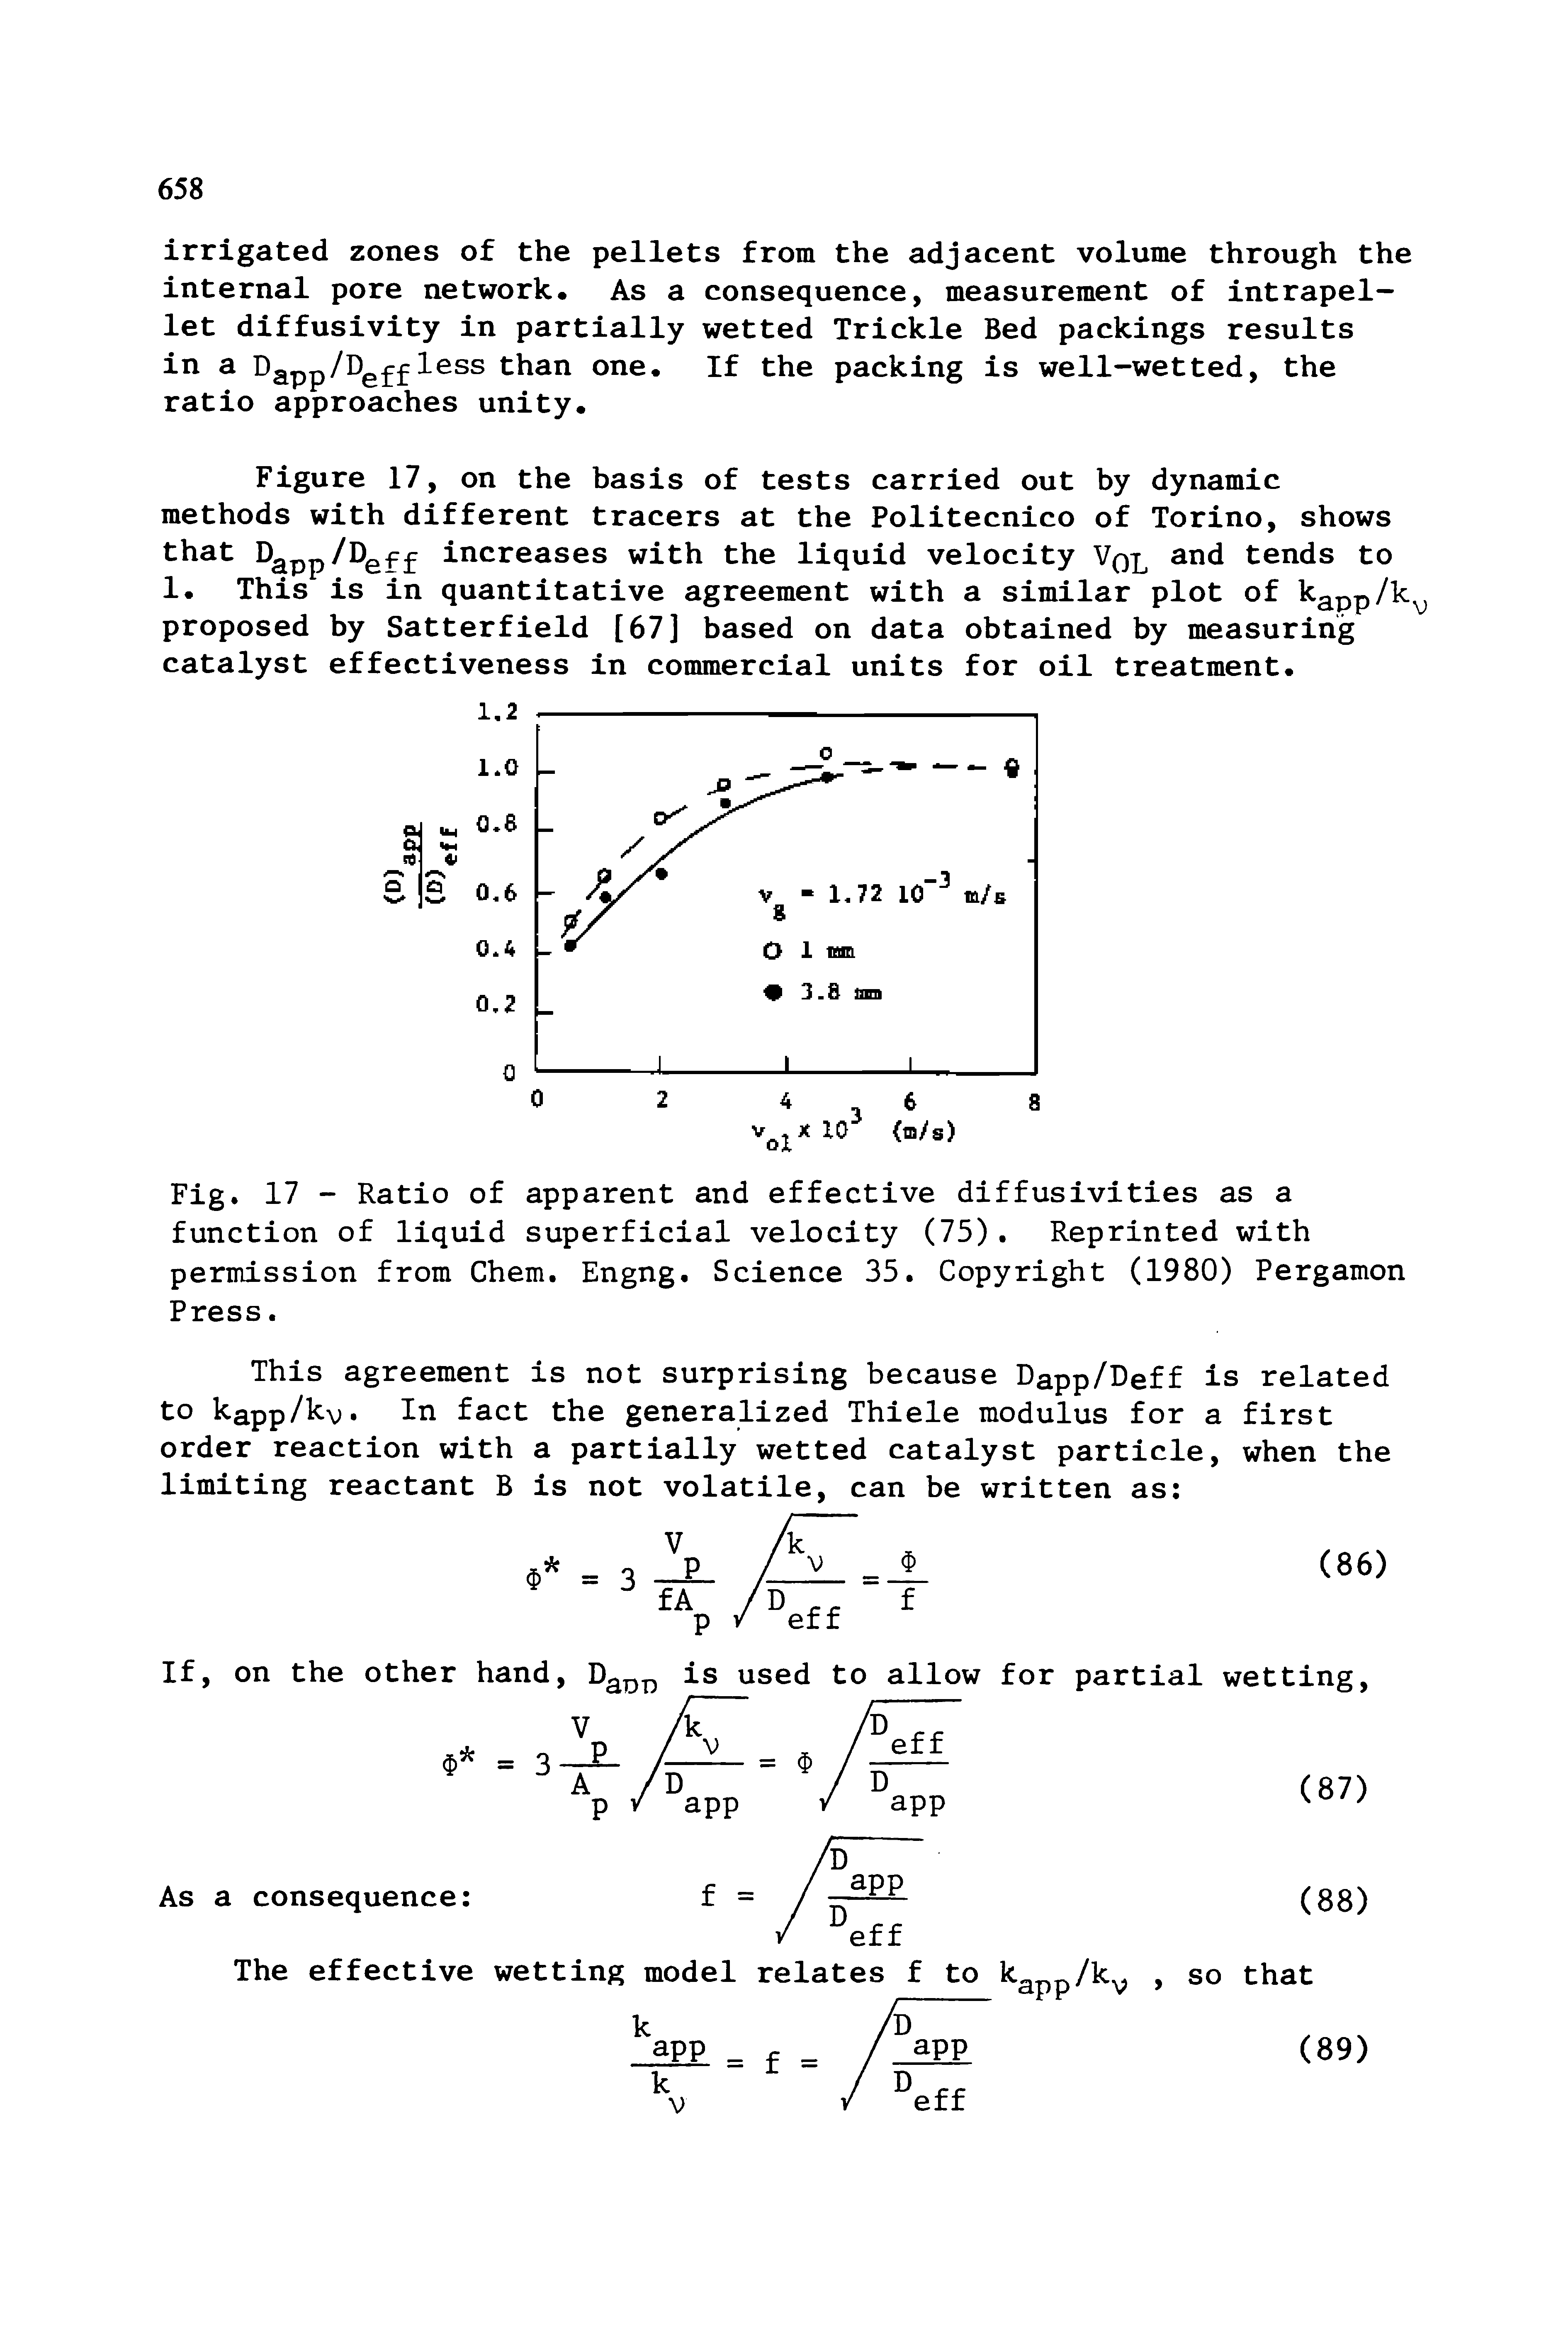 Fig. 17 - Ratio of apparent and effective diffusivities as a function of liquid superficial velocity (75). Reprinted with permission from Chem. Engng. Science 35. Copyright (1980) Pergamon Press.